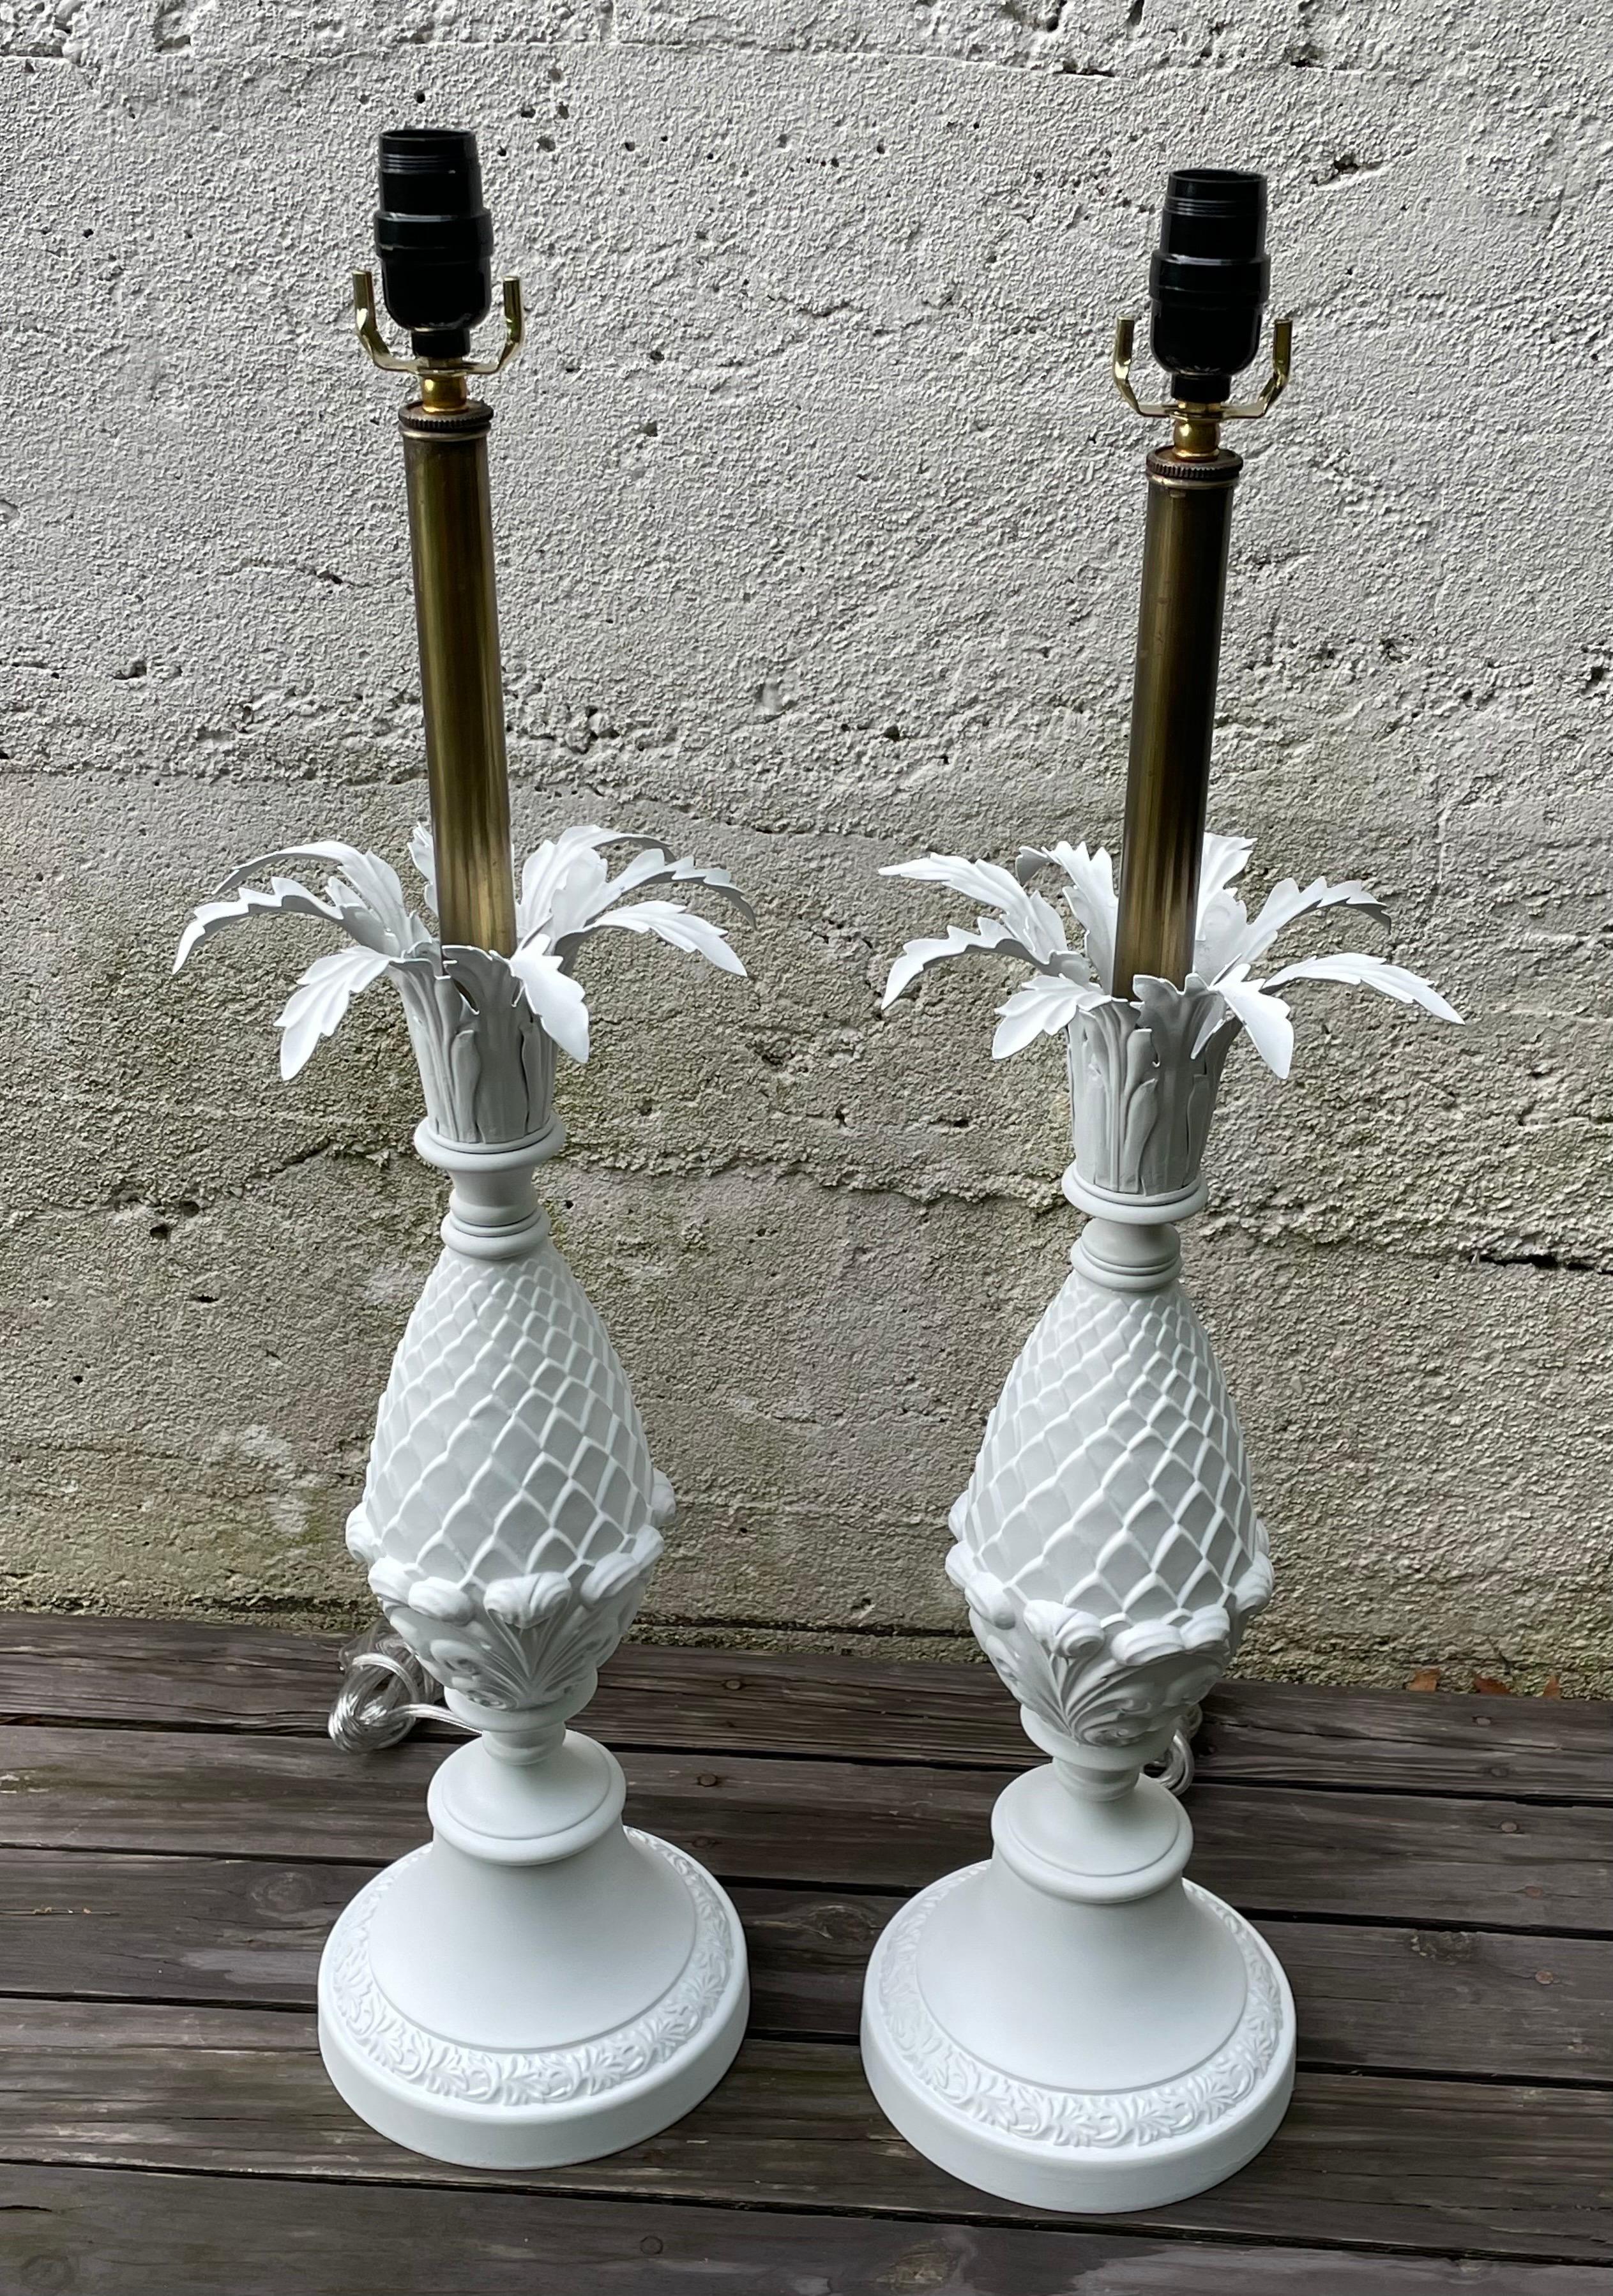 Mid-20th Century Pair of Hollywood Regency White Pineapple Table Lamps by Rembrandt For Sale